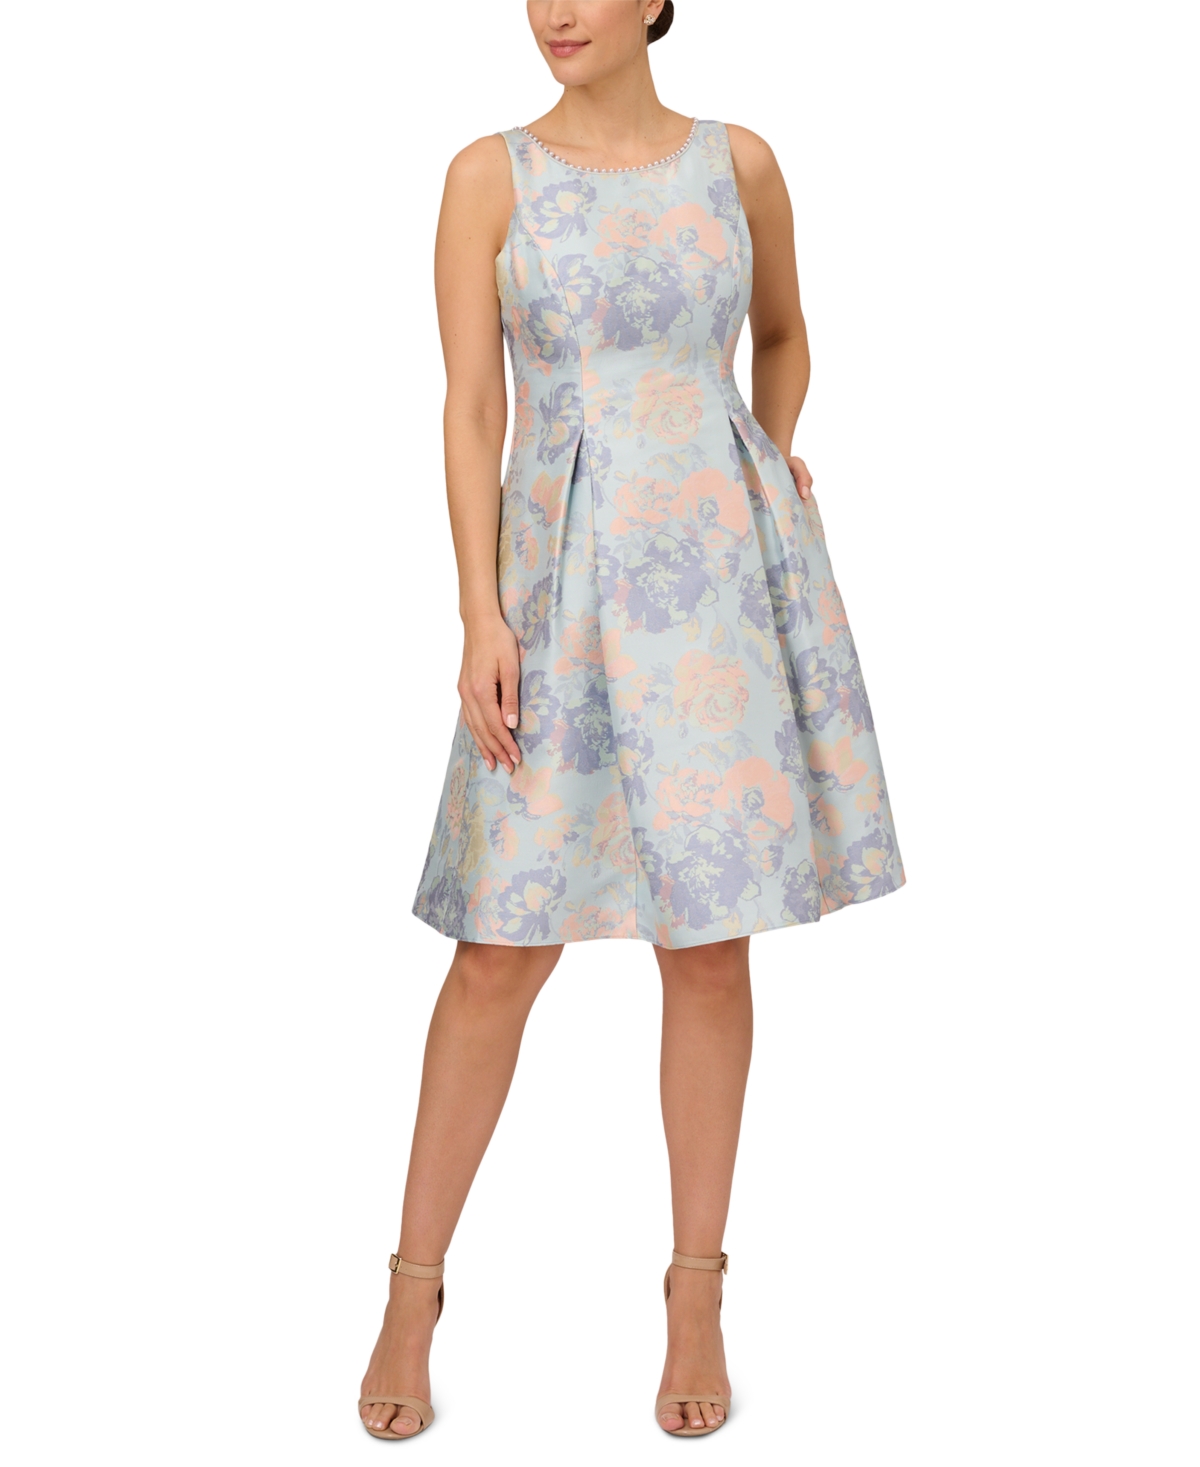 Adrianna Papell Women's Floral-Jacquard Embellished Dress